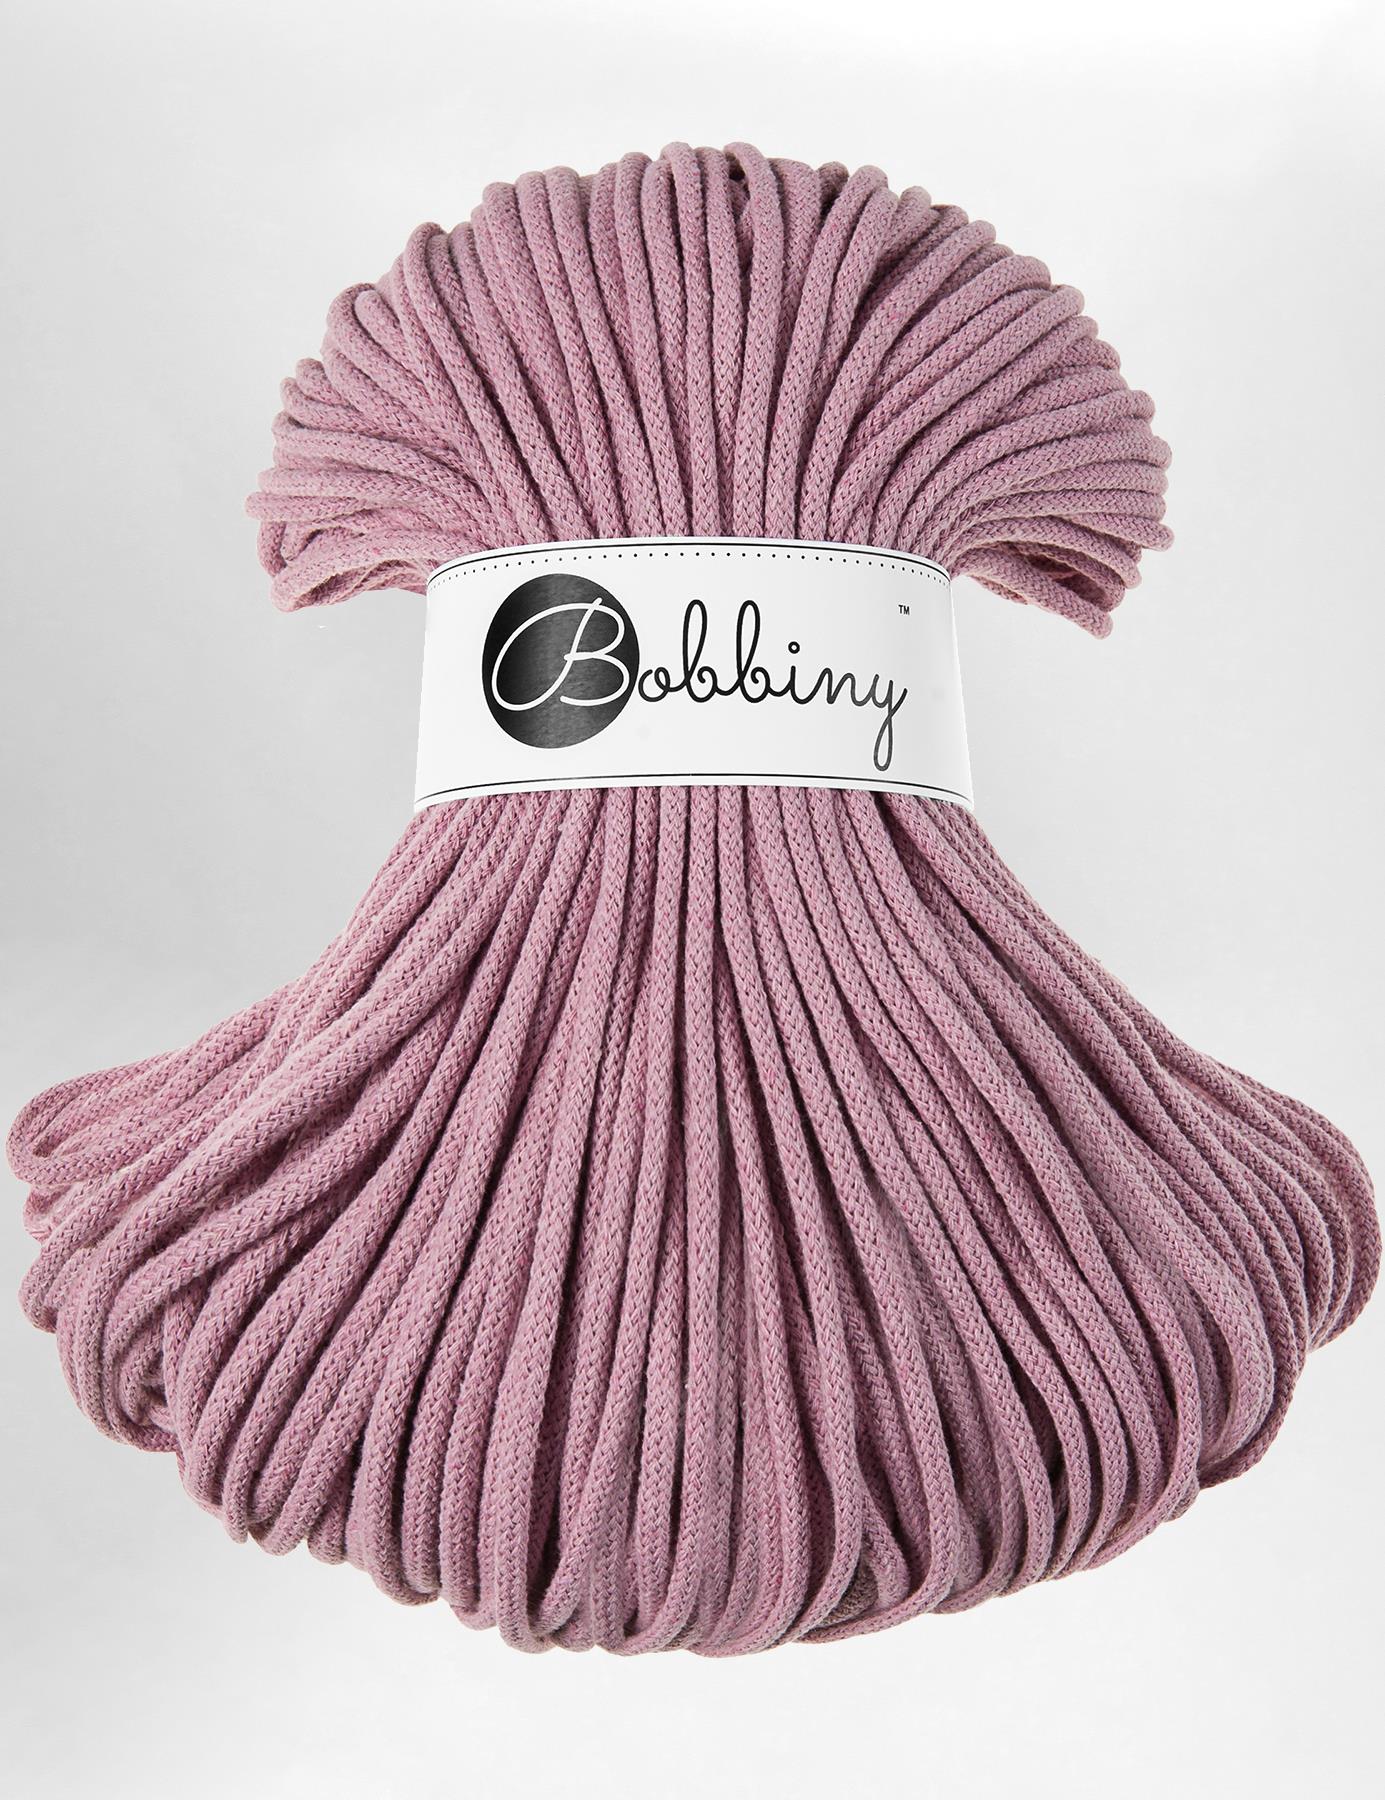 5mm Dusty pink recycled cotton macrame cord by Bobbiny (100m)